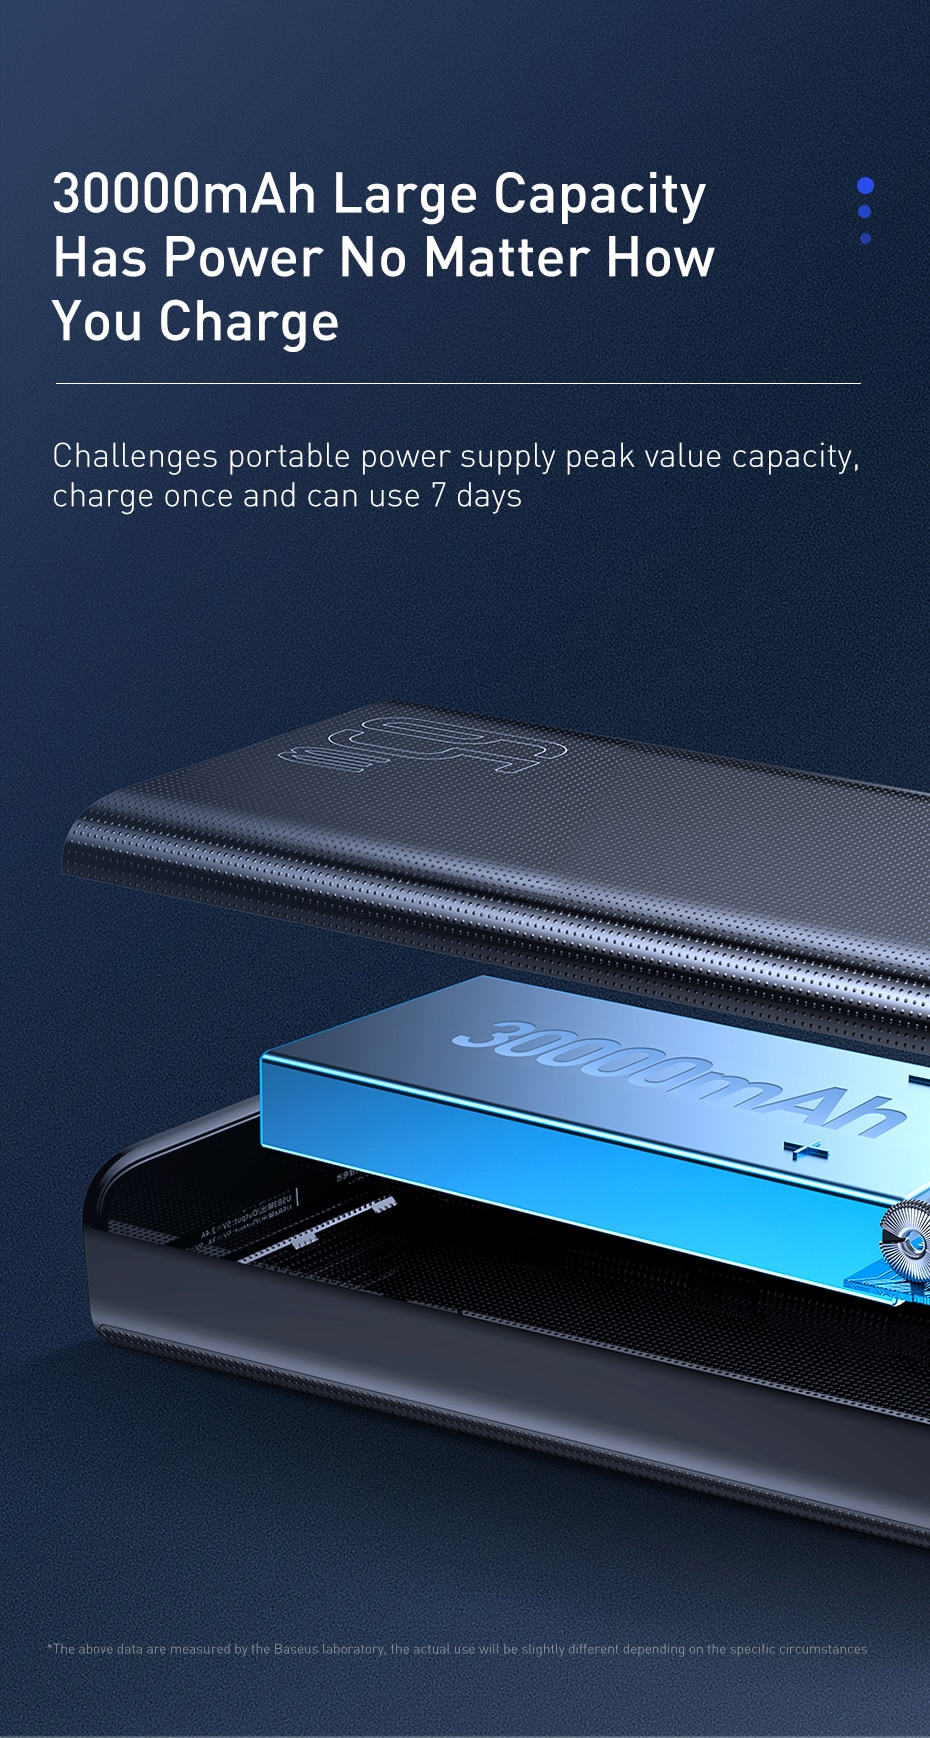 Challenges portable power supply peak value capacity, charge once and can use 7 days